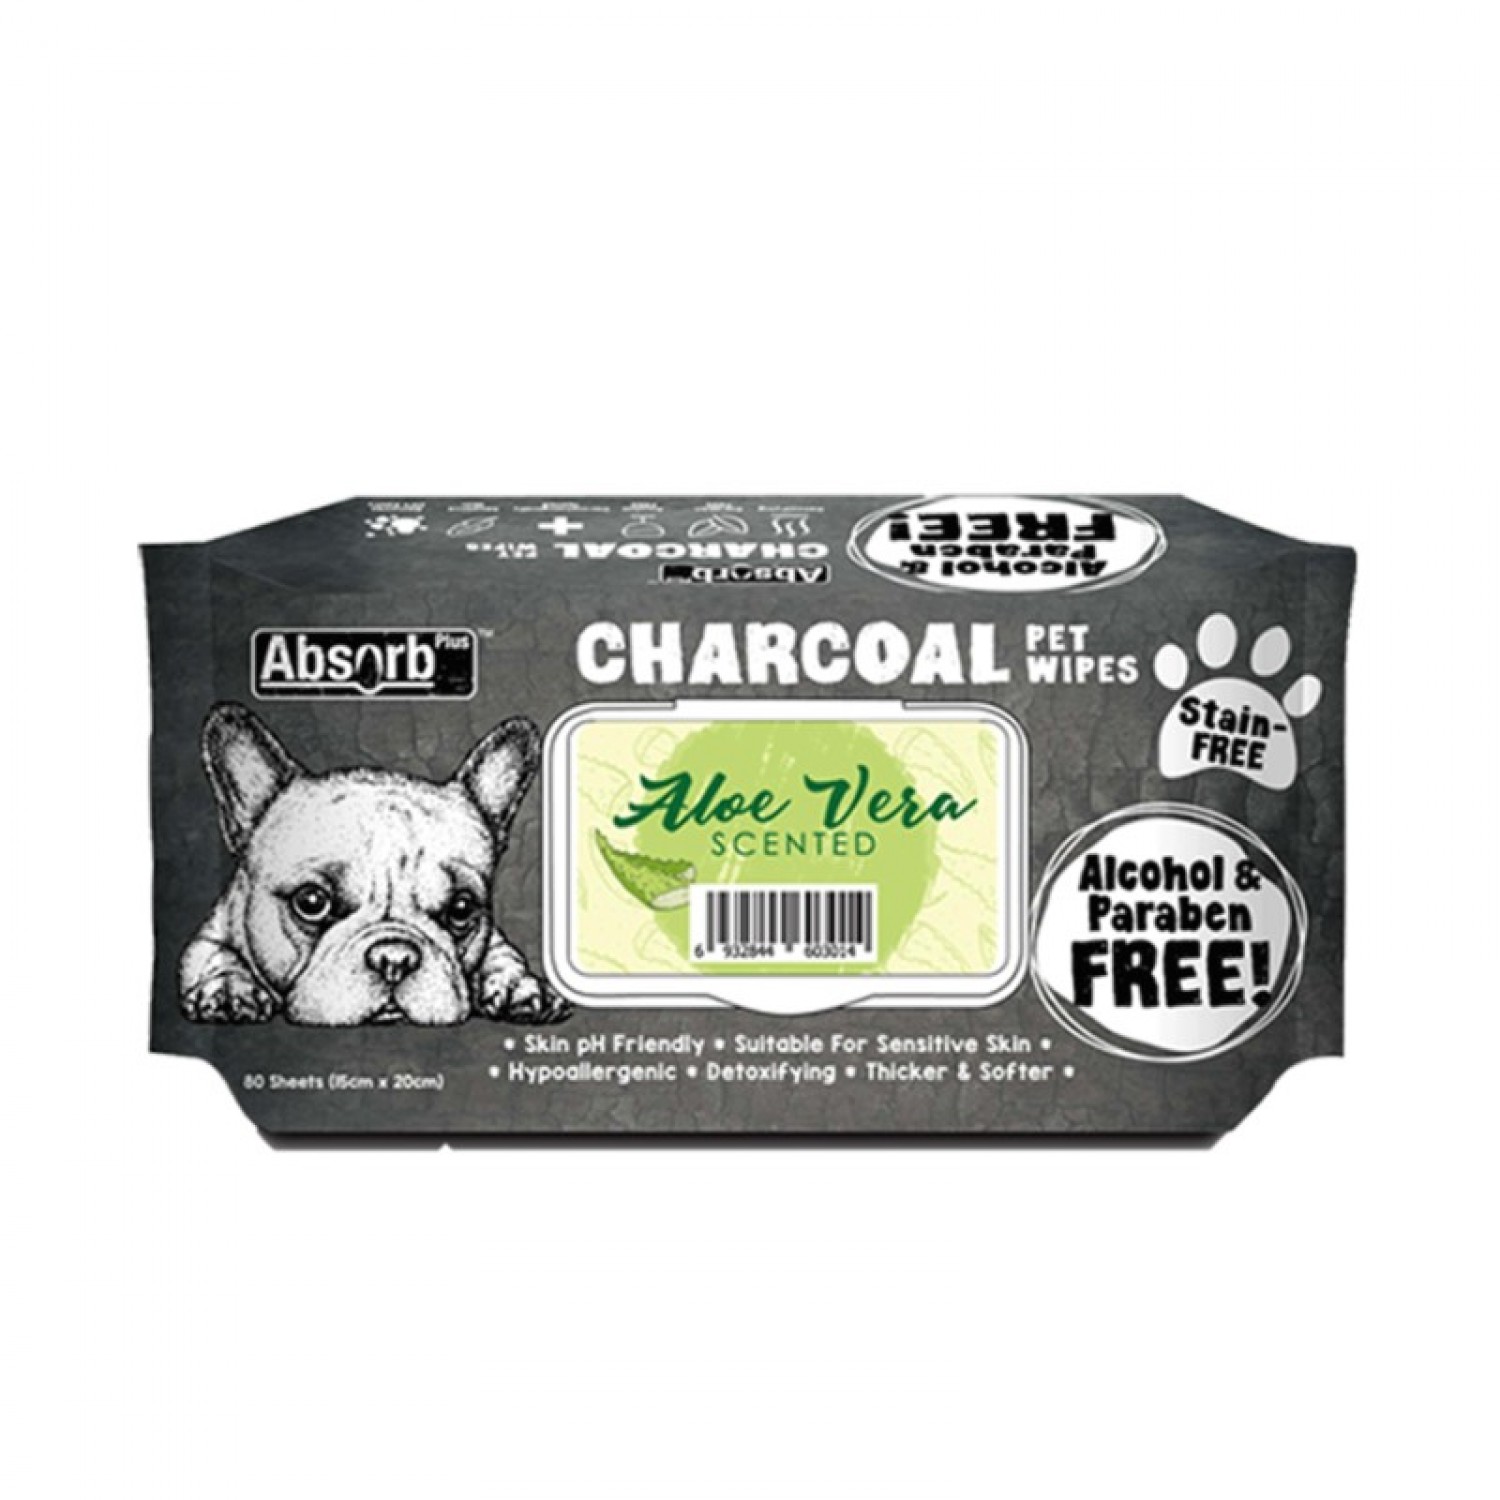 Absolute Pet Absorb Plus Charcoal Pet Wipes Aloe Vera 80 sheets